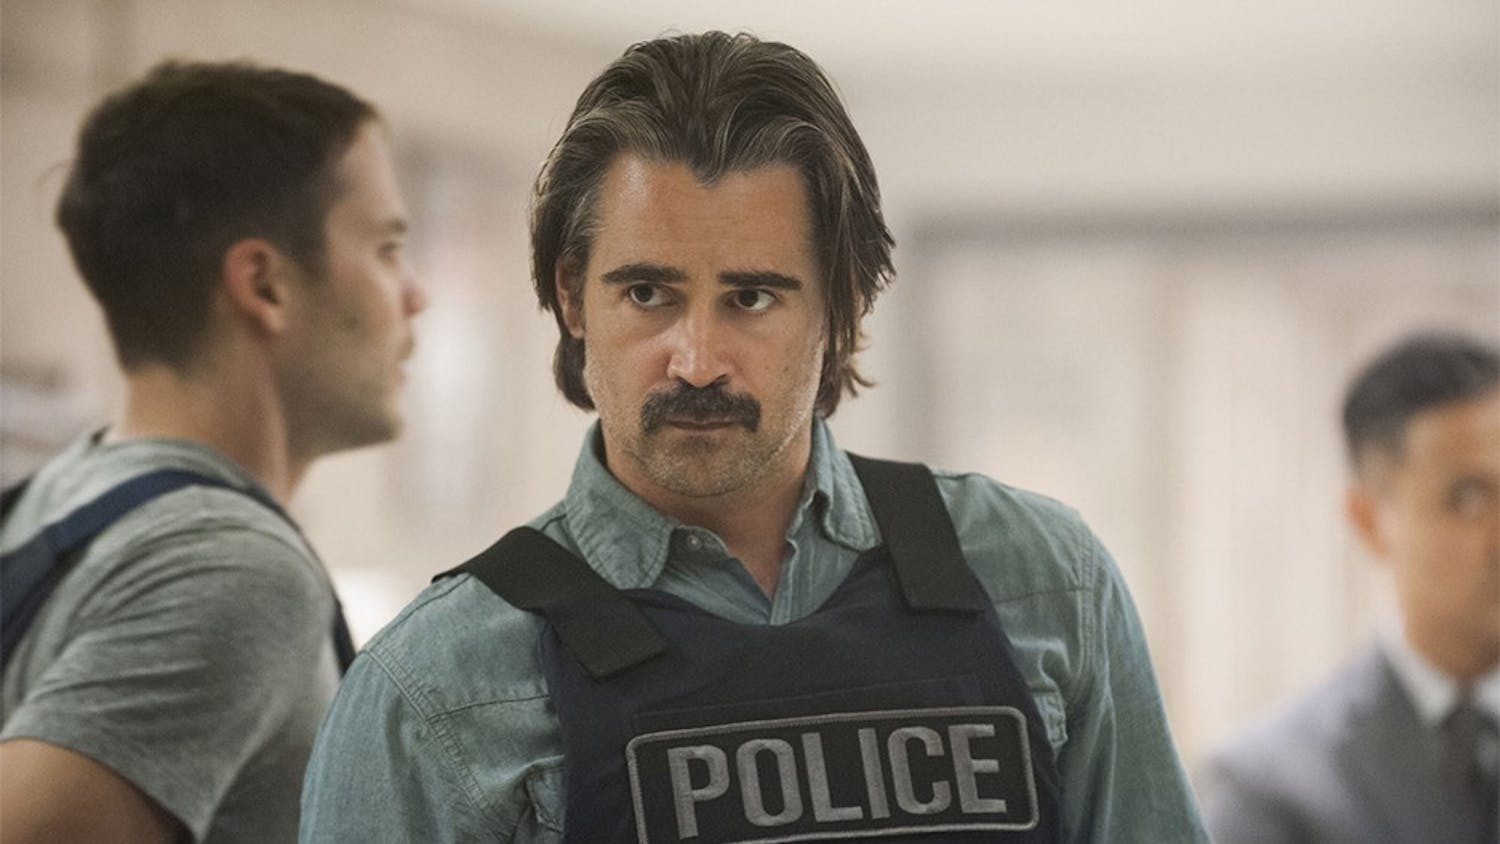 ENTER TV-TRUEDETECTIVE-REVIEW 1 ND